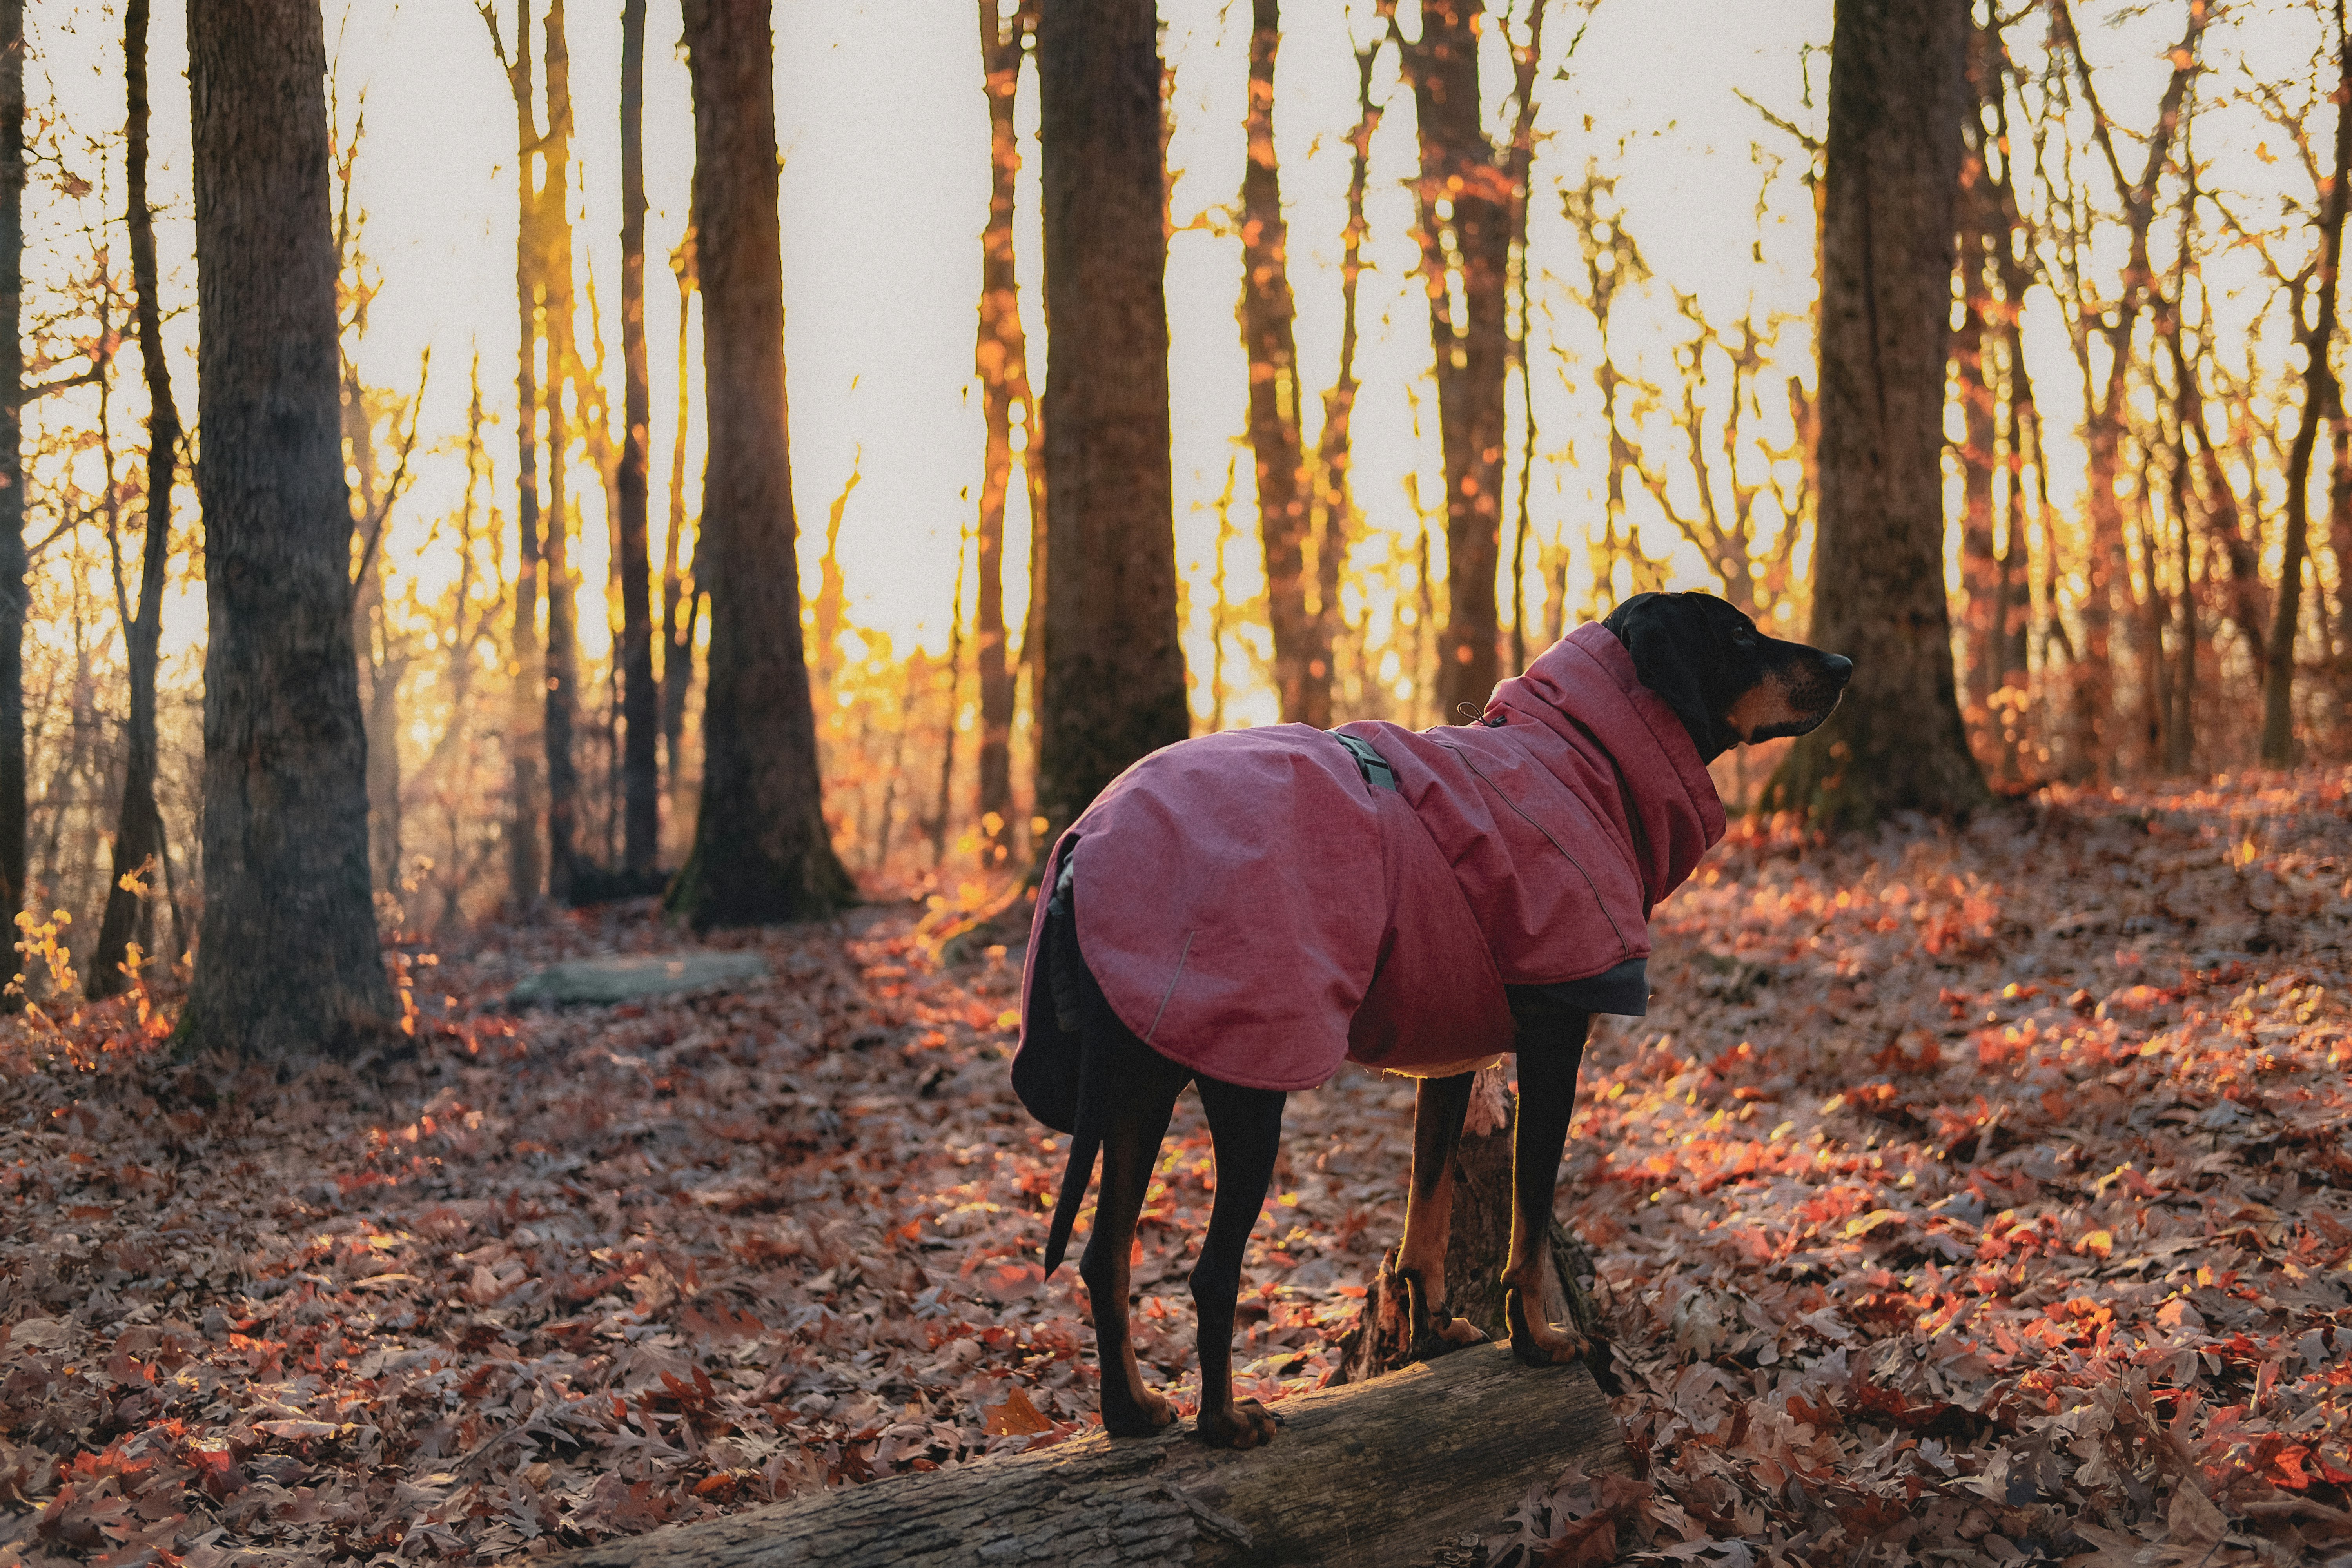 black labrador retriever in red coat standing on brown dried leaves during daytime